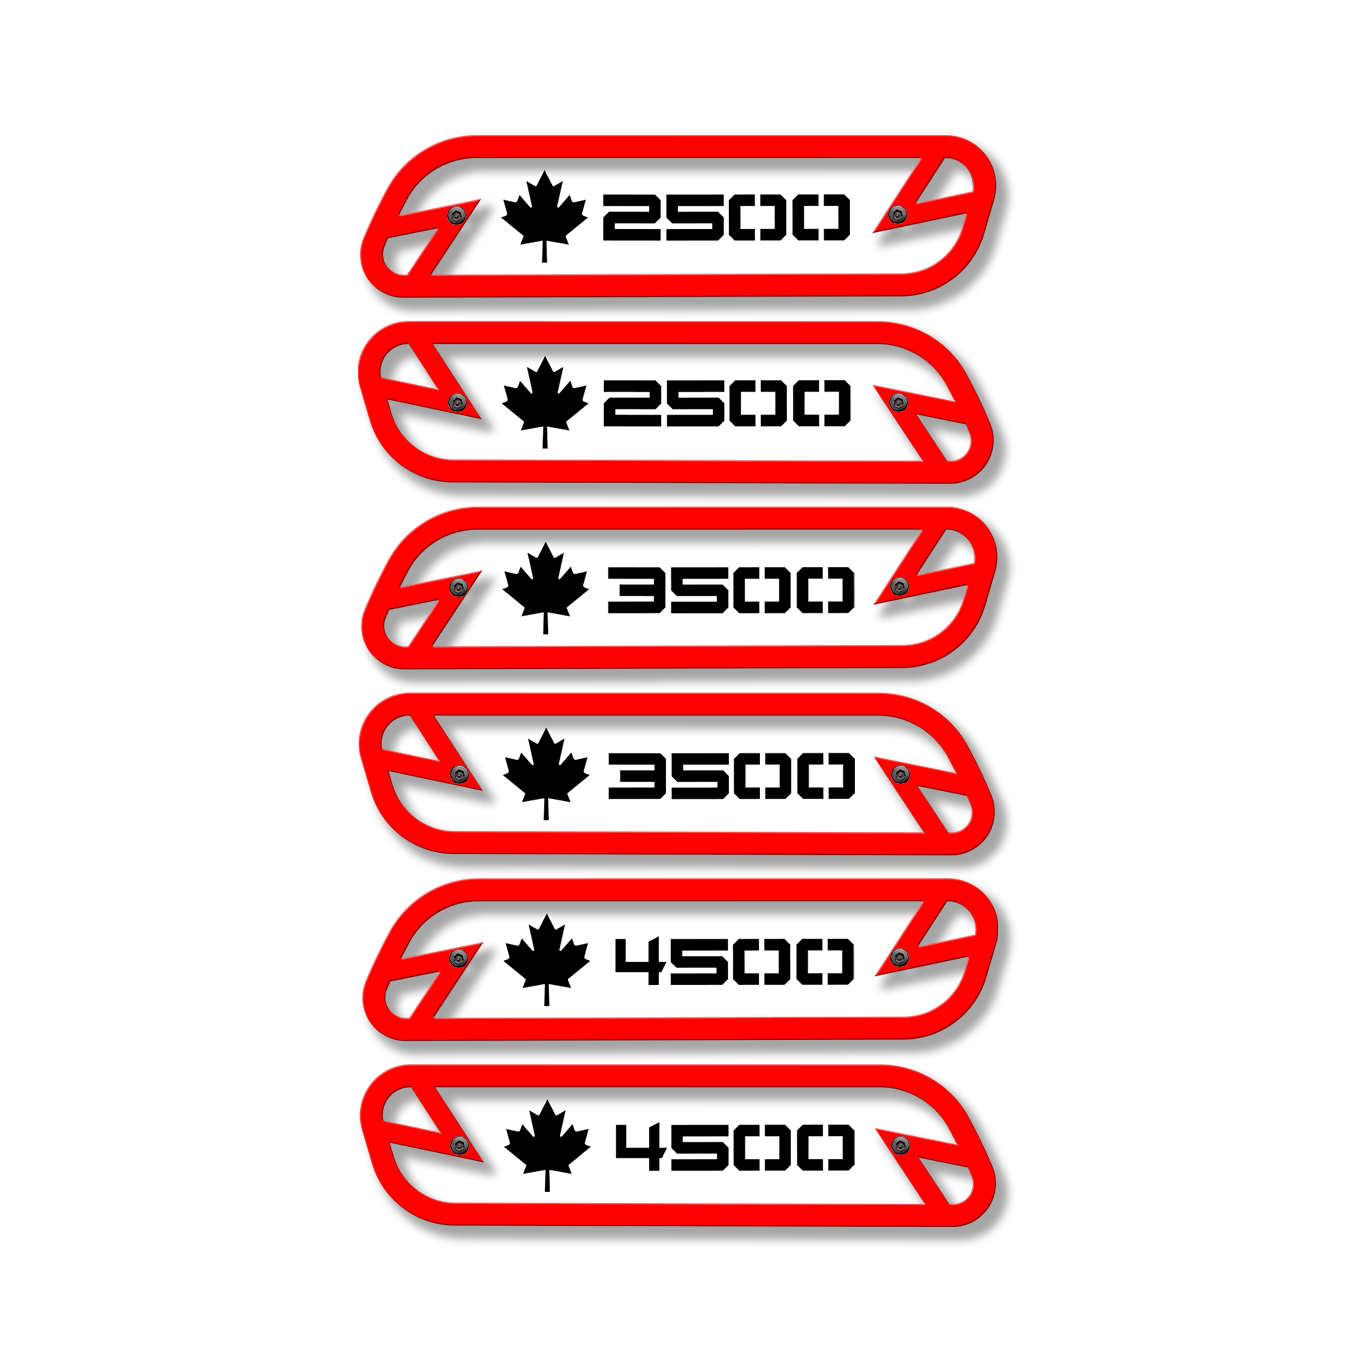 Maple Leaf 2500/3500/4500 Hood Emblem Replacements - Fits 2019-2022 Ram® 2500, 3500, 4500 - Fully Customizable, LED or Non-LED